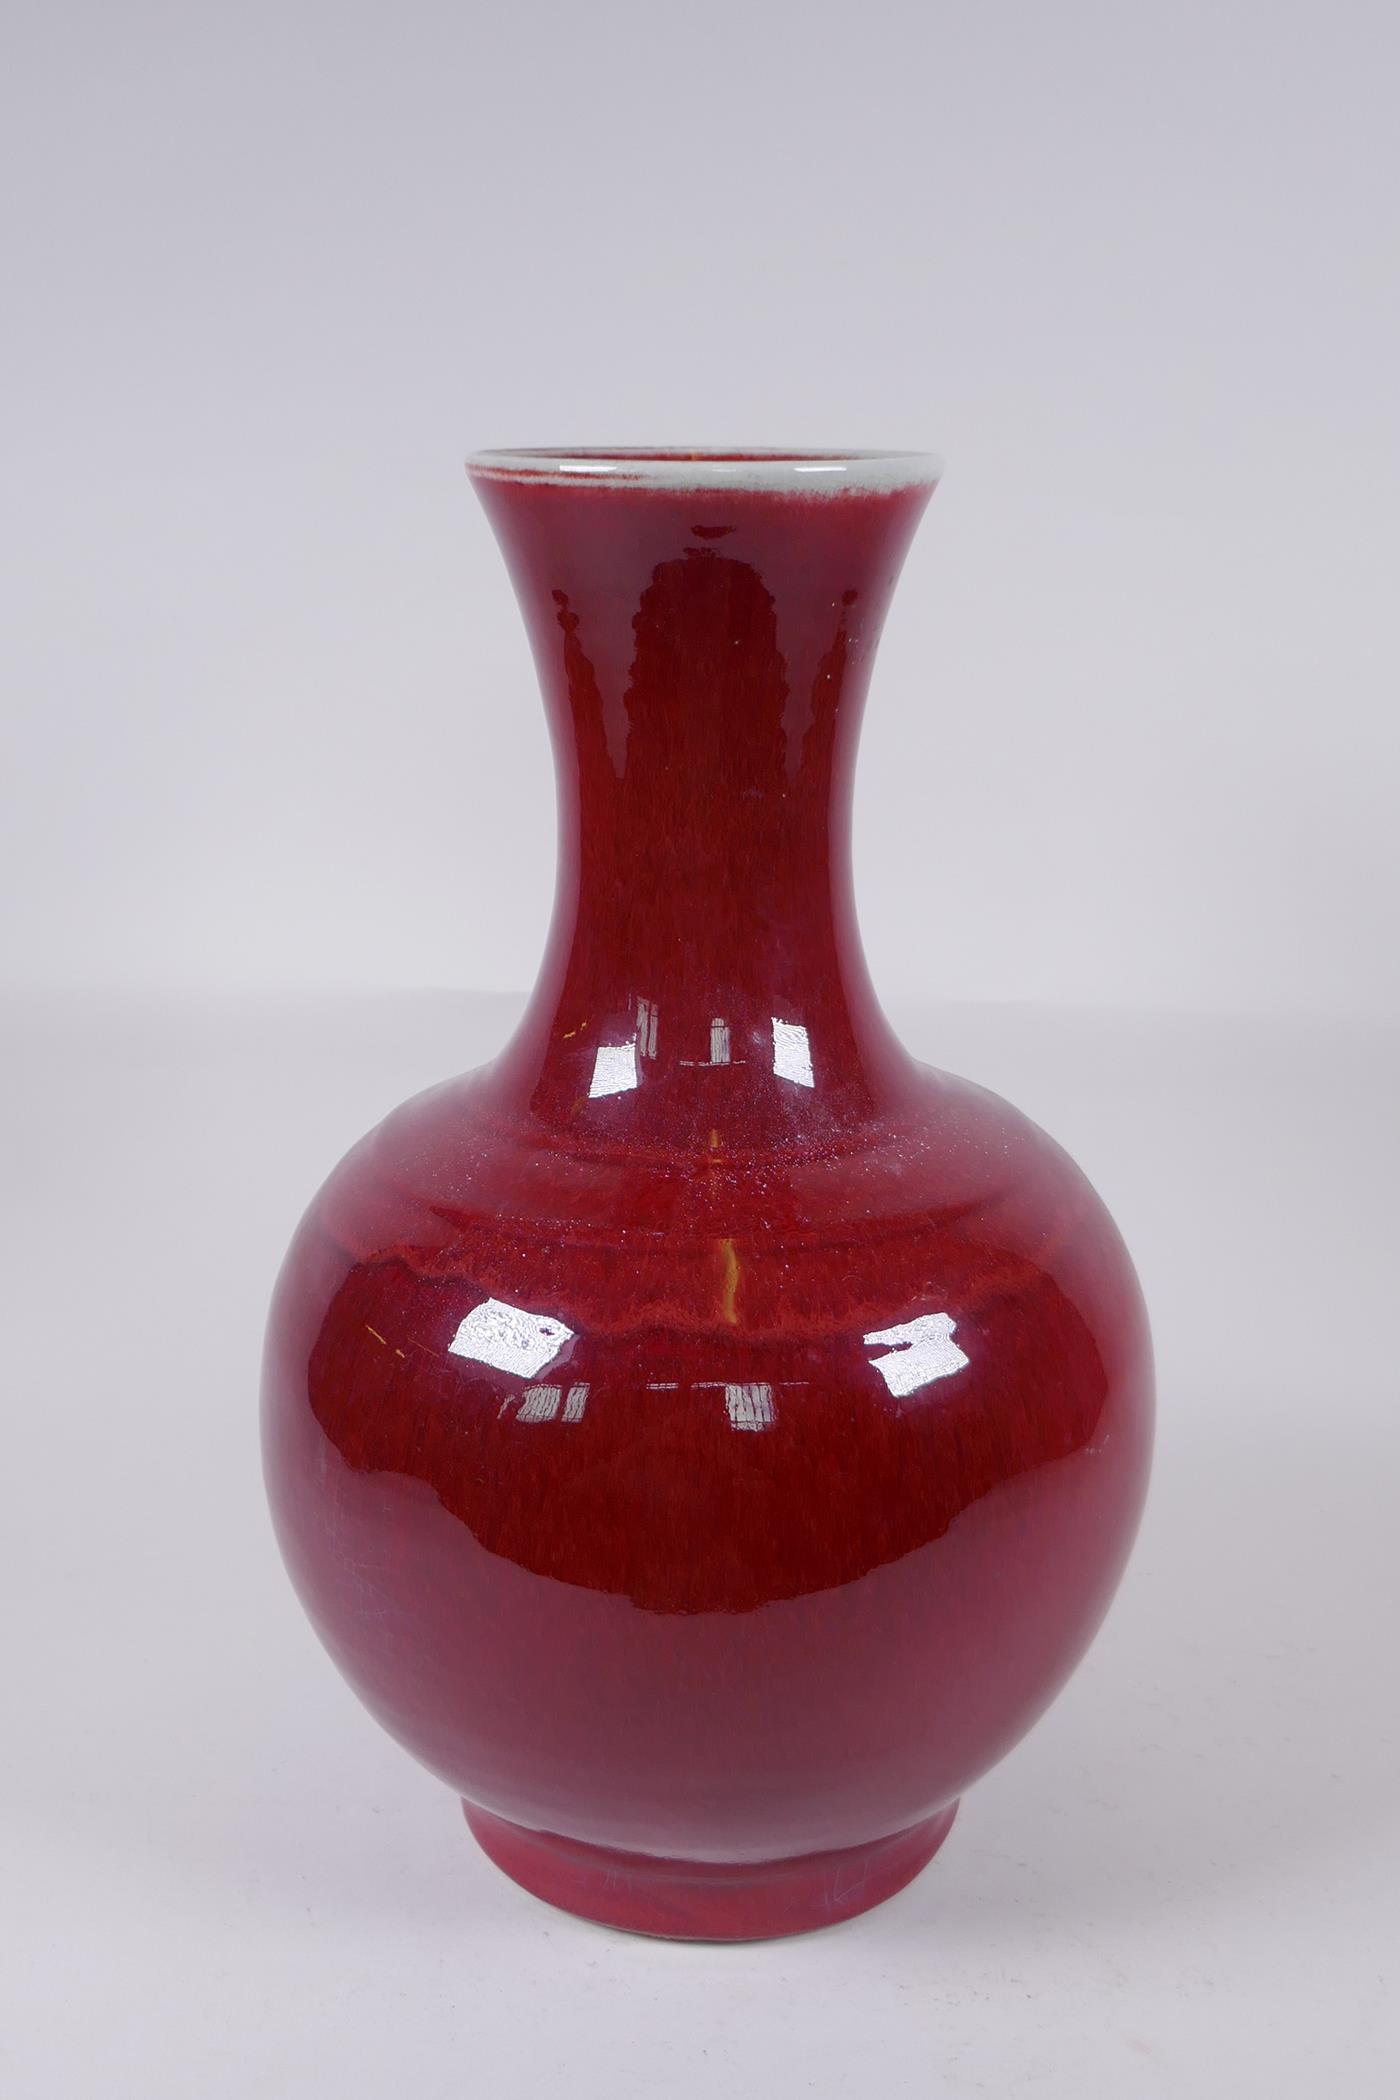 A sang de beouf glazed porcelain vase, Chinese Yongzheng 6 character mark to base, 34cm high - Image 3 of 4